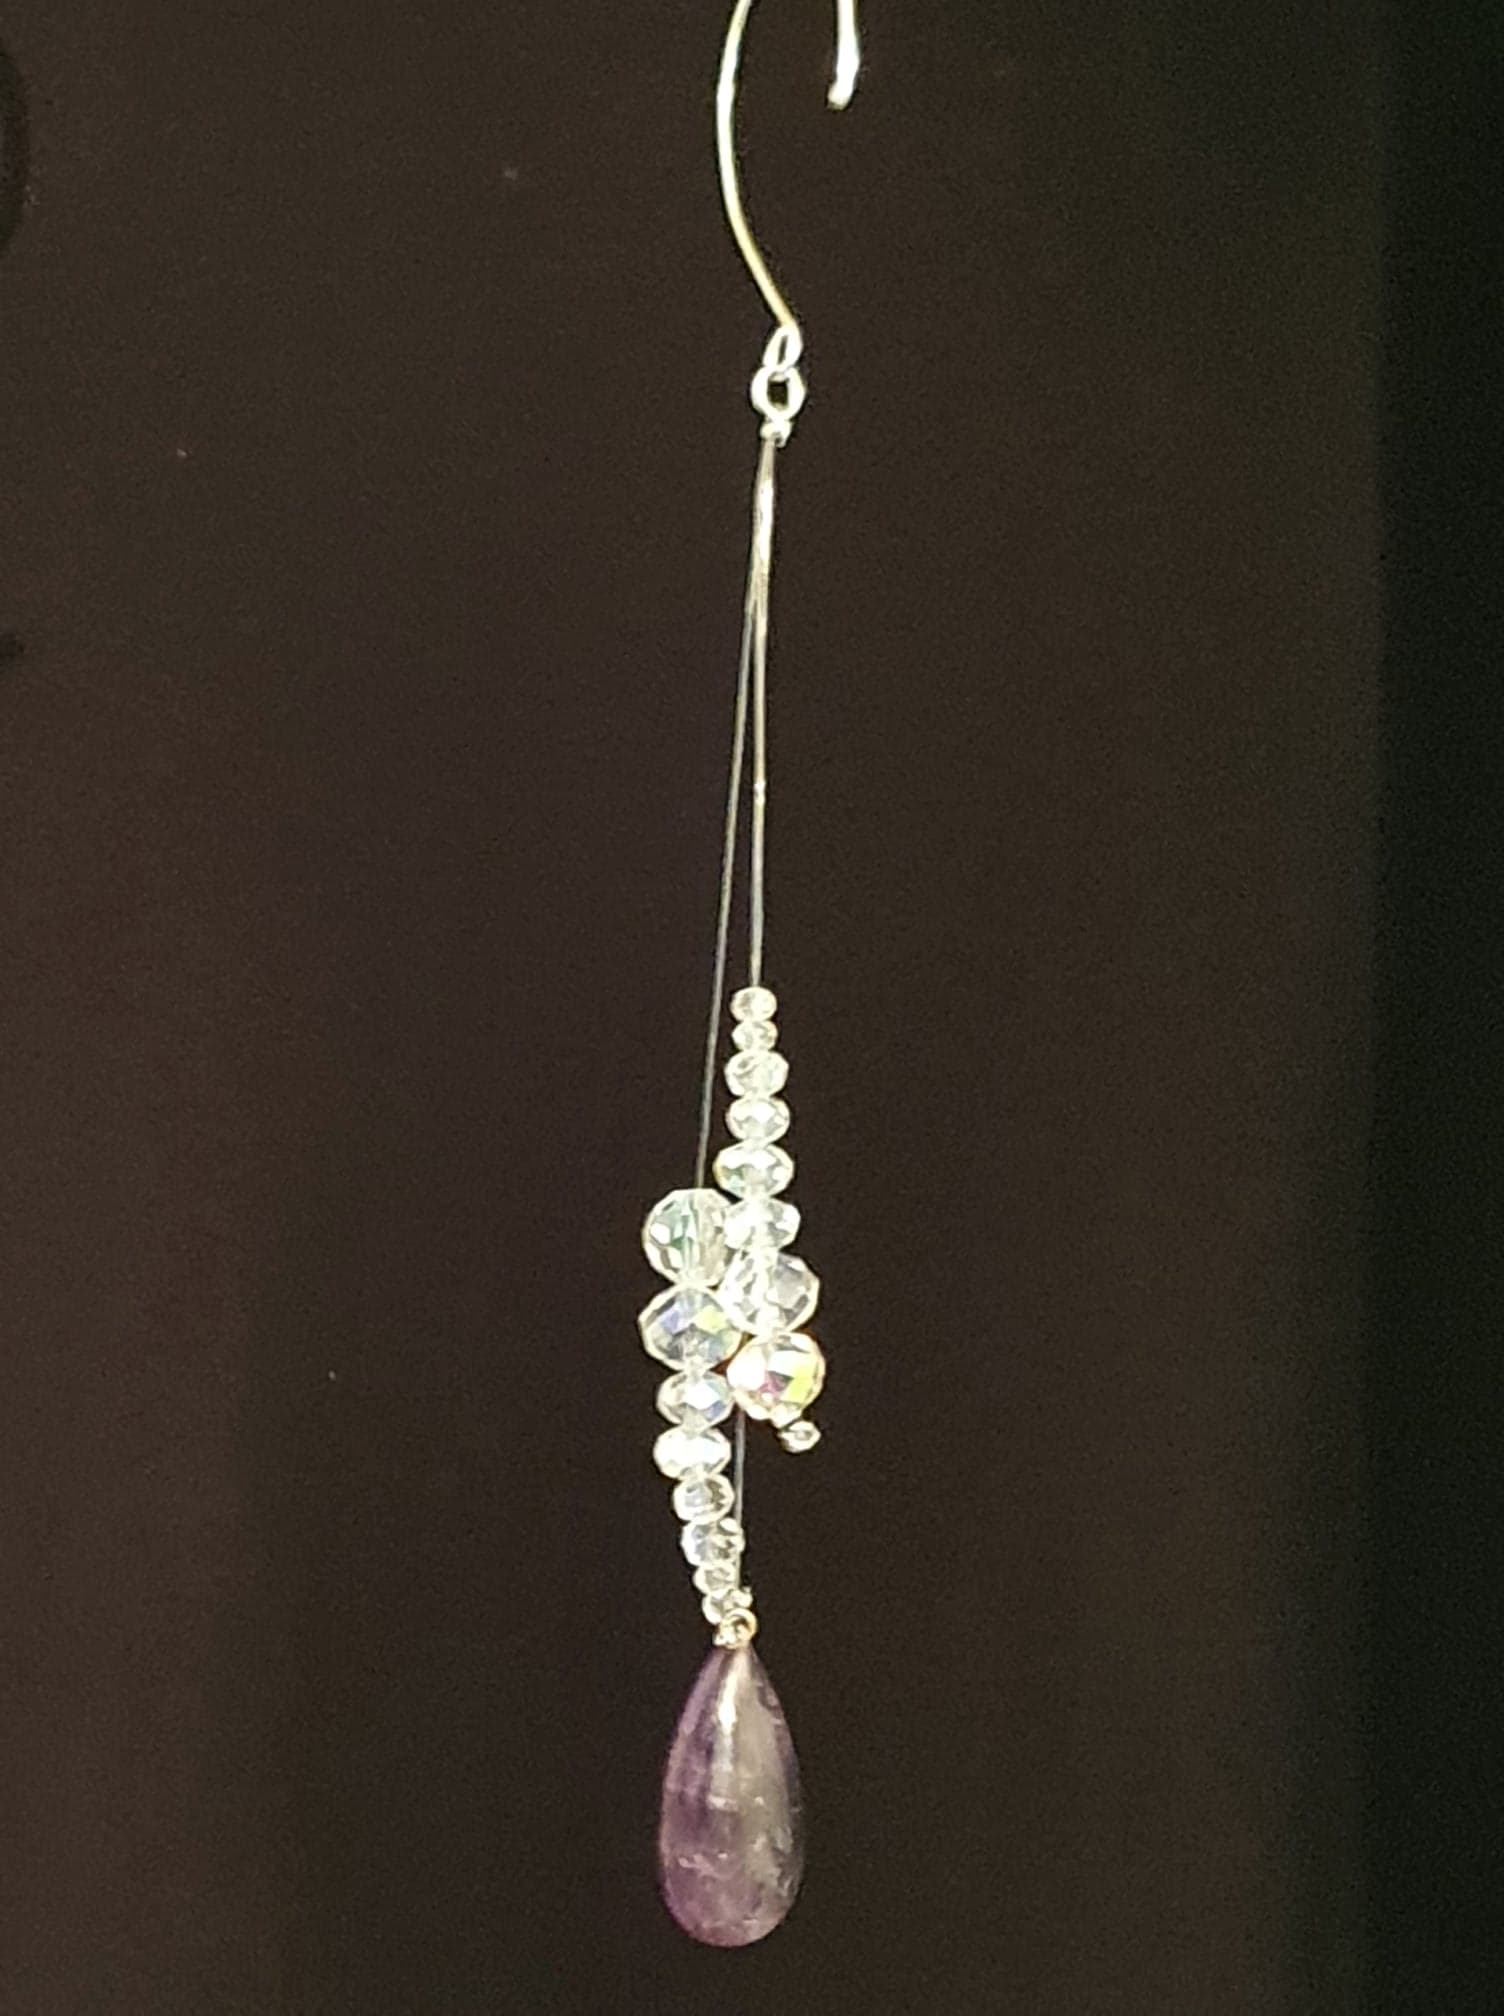 Small cluster window hanger. Amethyst crystal with AB glass crystals window decoration